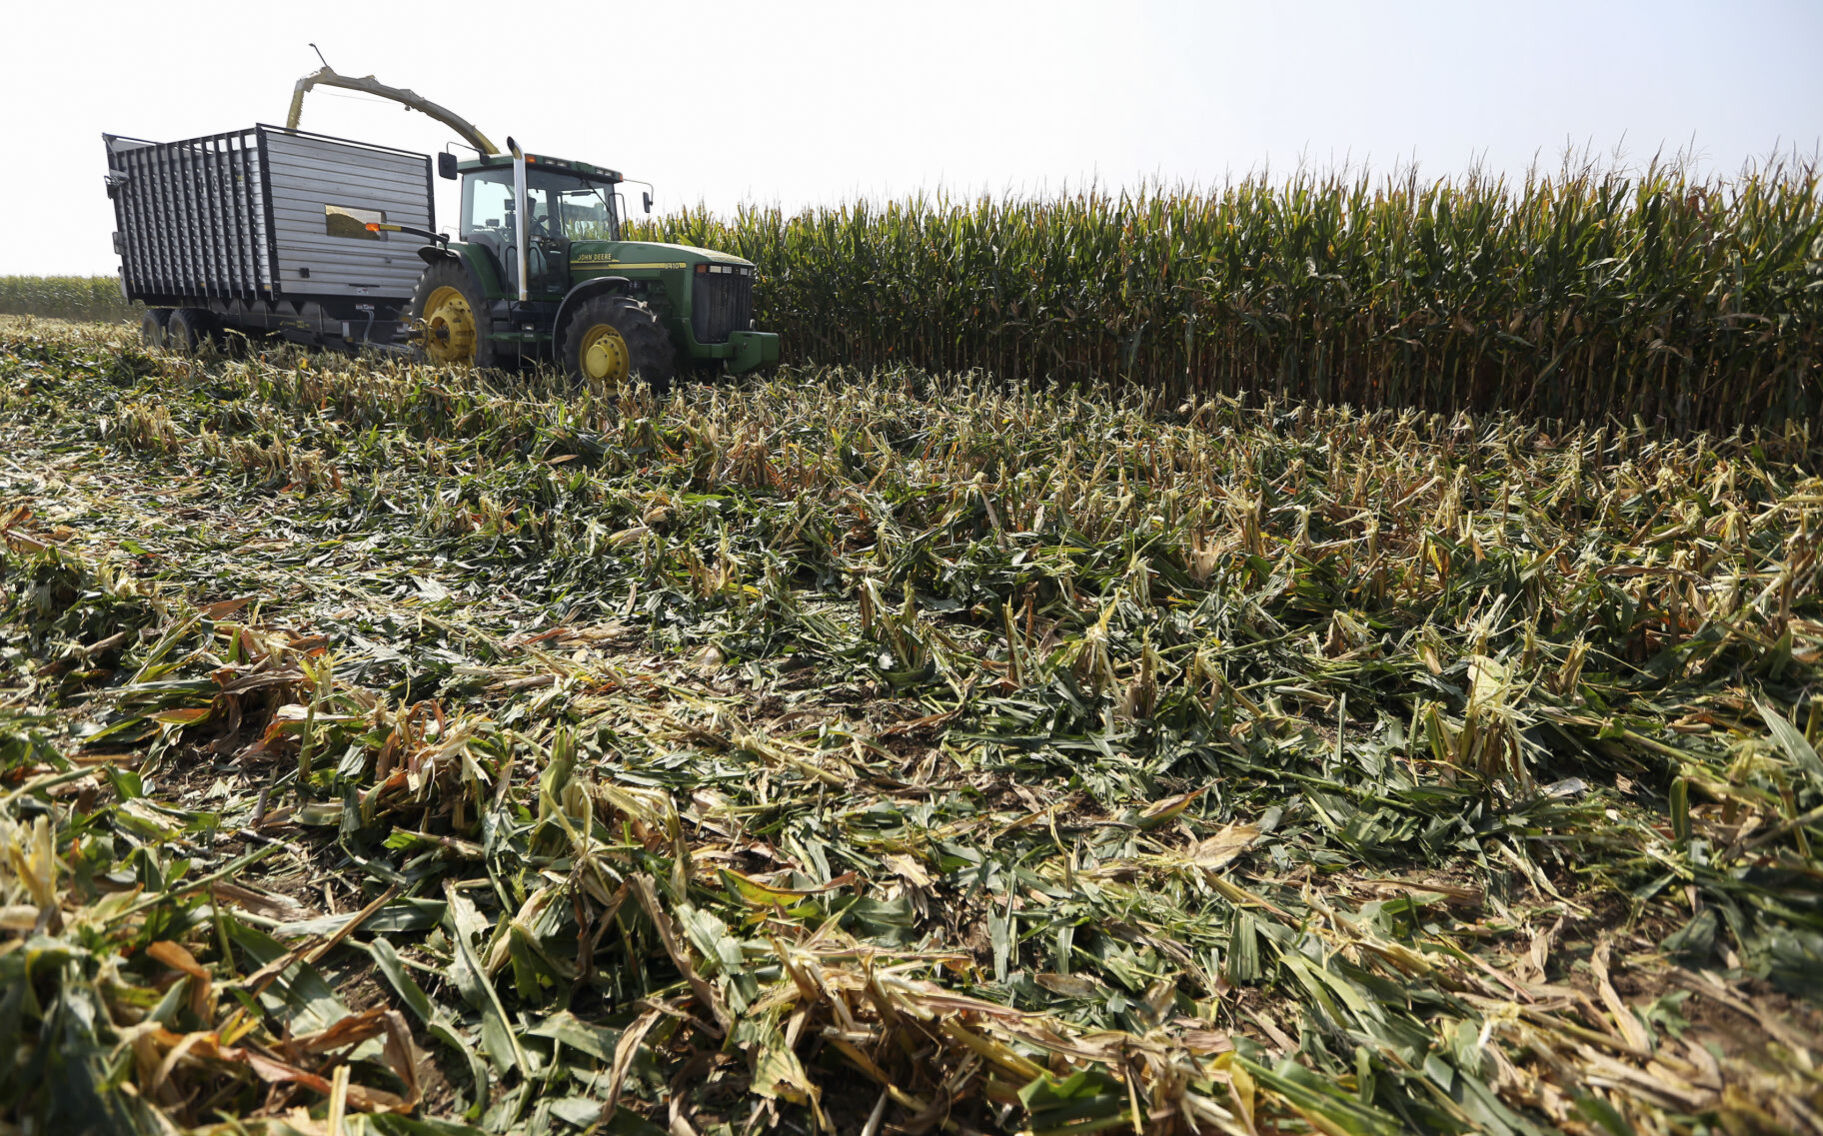 Earlage is chopped at the farm of Craig Recker, north of Dyersville, Iowa, on Tuesday, Sept. 22, 2020. PHOTO CREDIT: NICKI KOHL